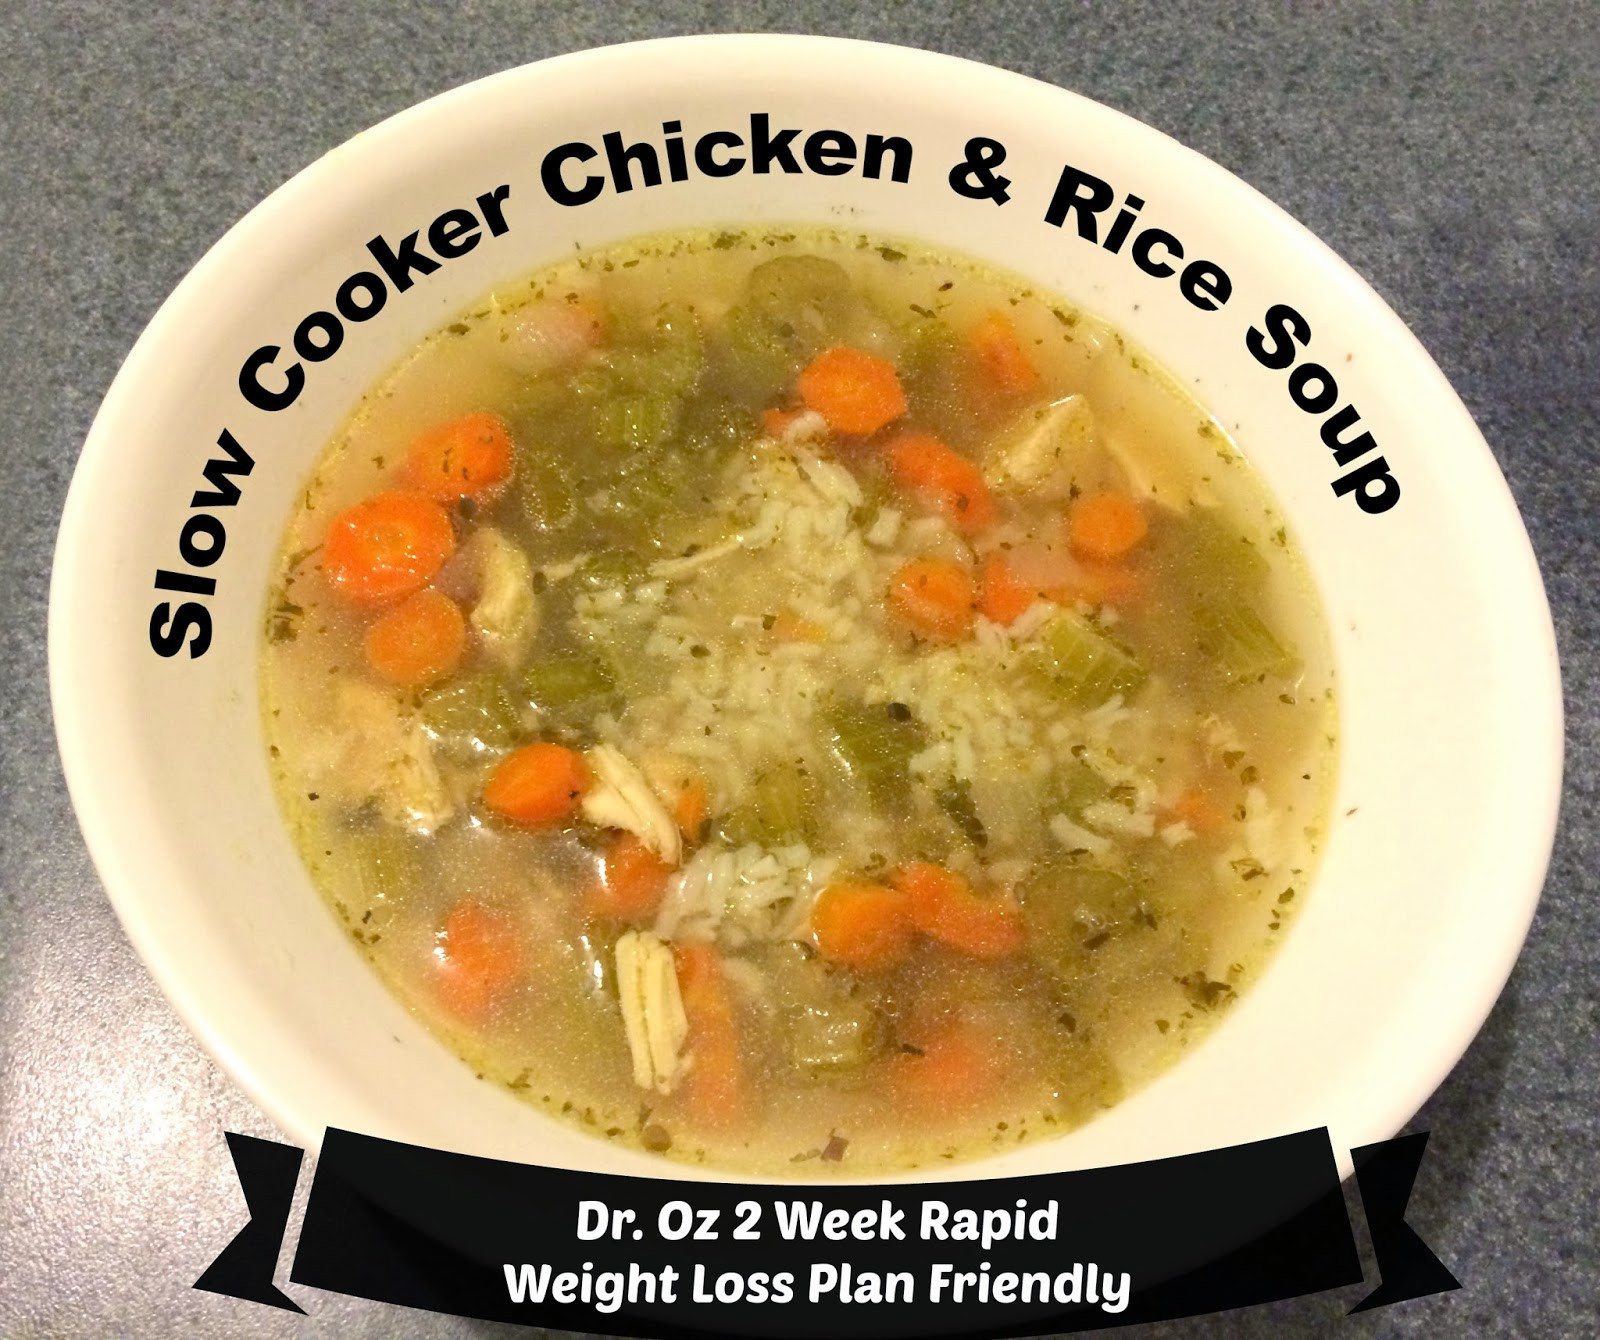 Dr Oz 2 Week Rapid Weight Loss Plan Recipes
 Slow Cooker Chicken and Rice Soup Dr Oz Rapid Weight